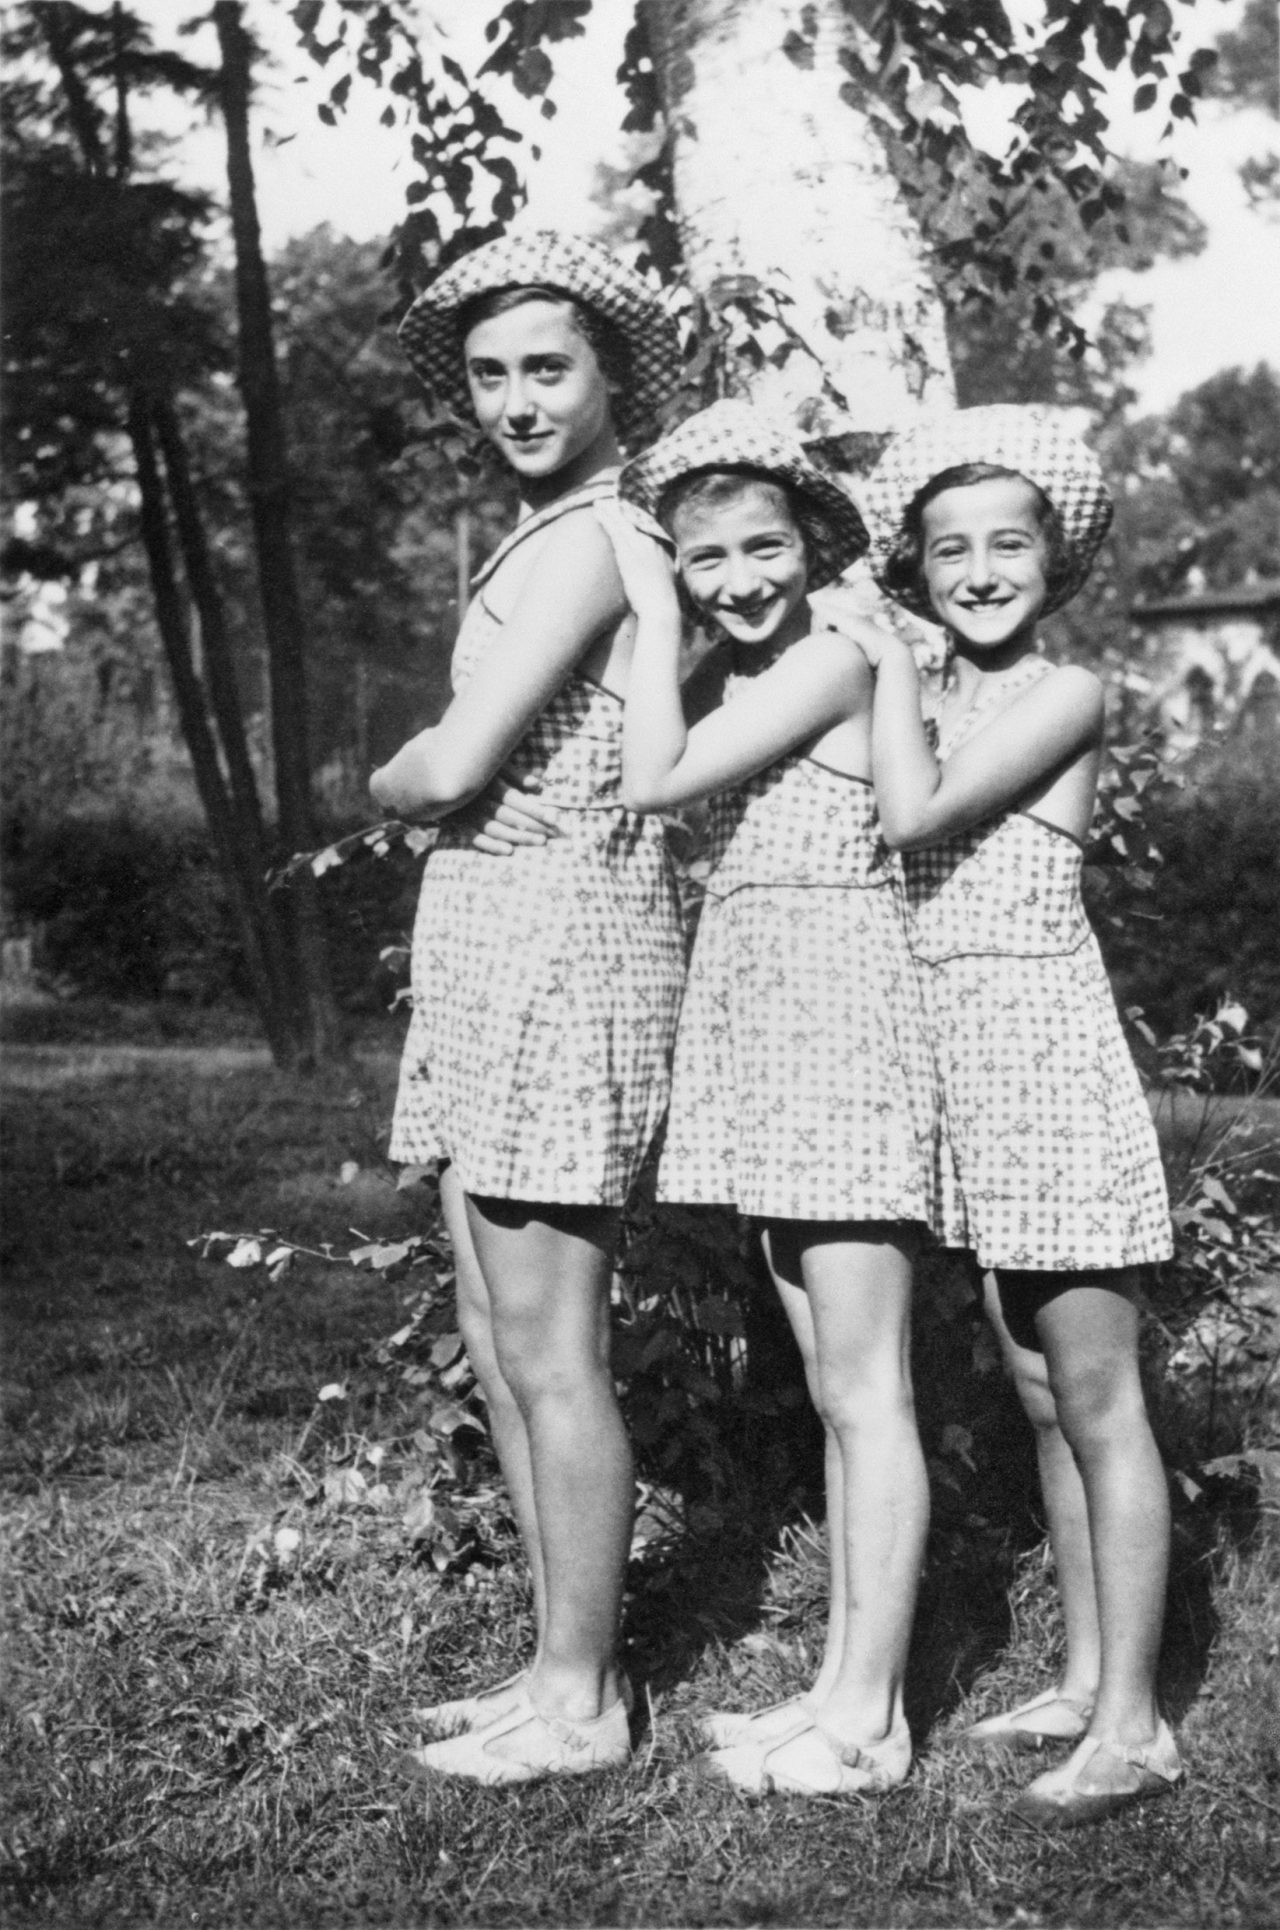 Anita (right) with her two sisters Marianne and Renate © IWM (HU 139993)